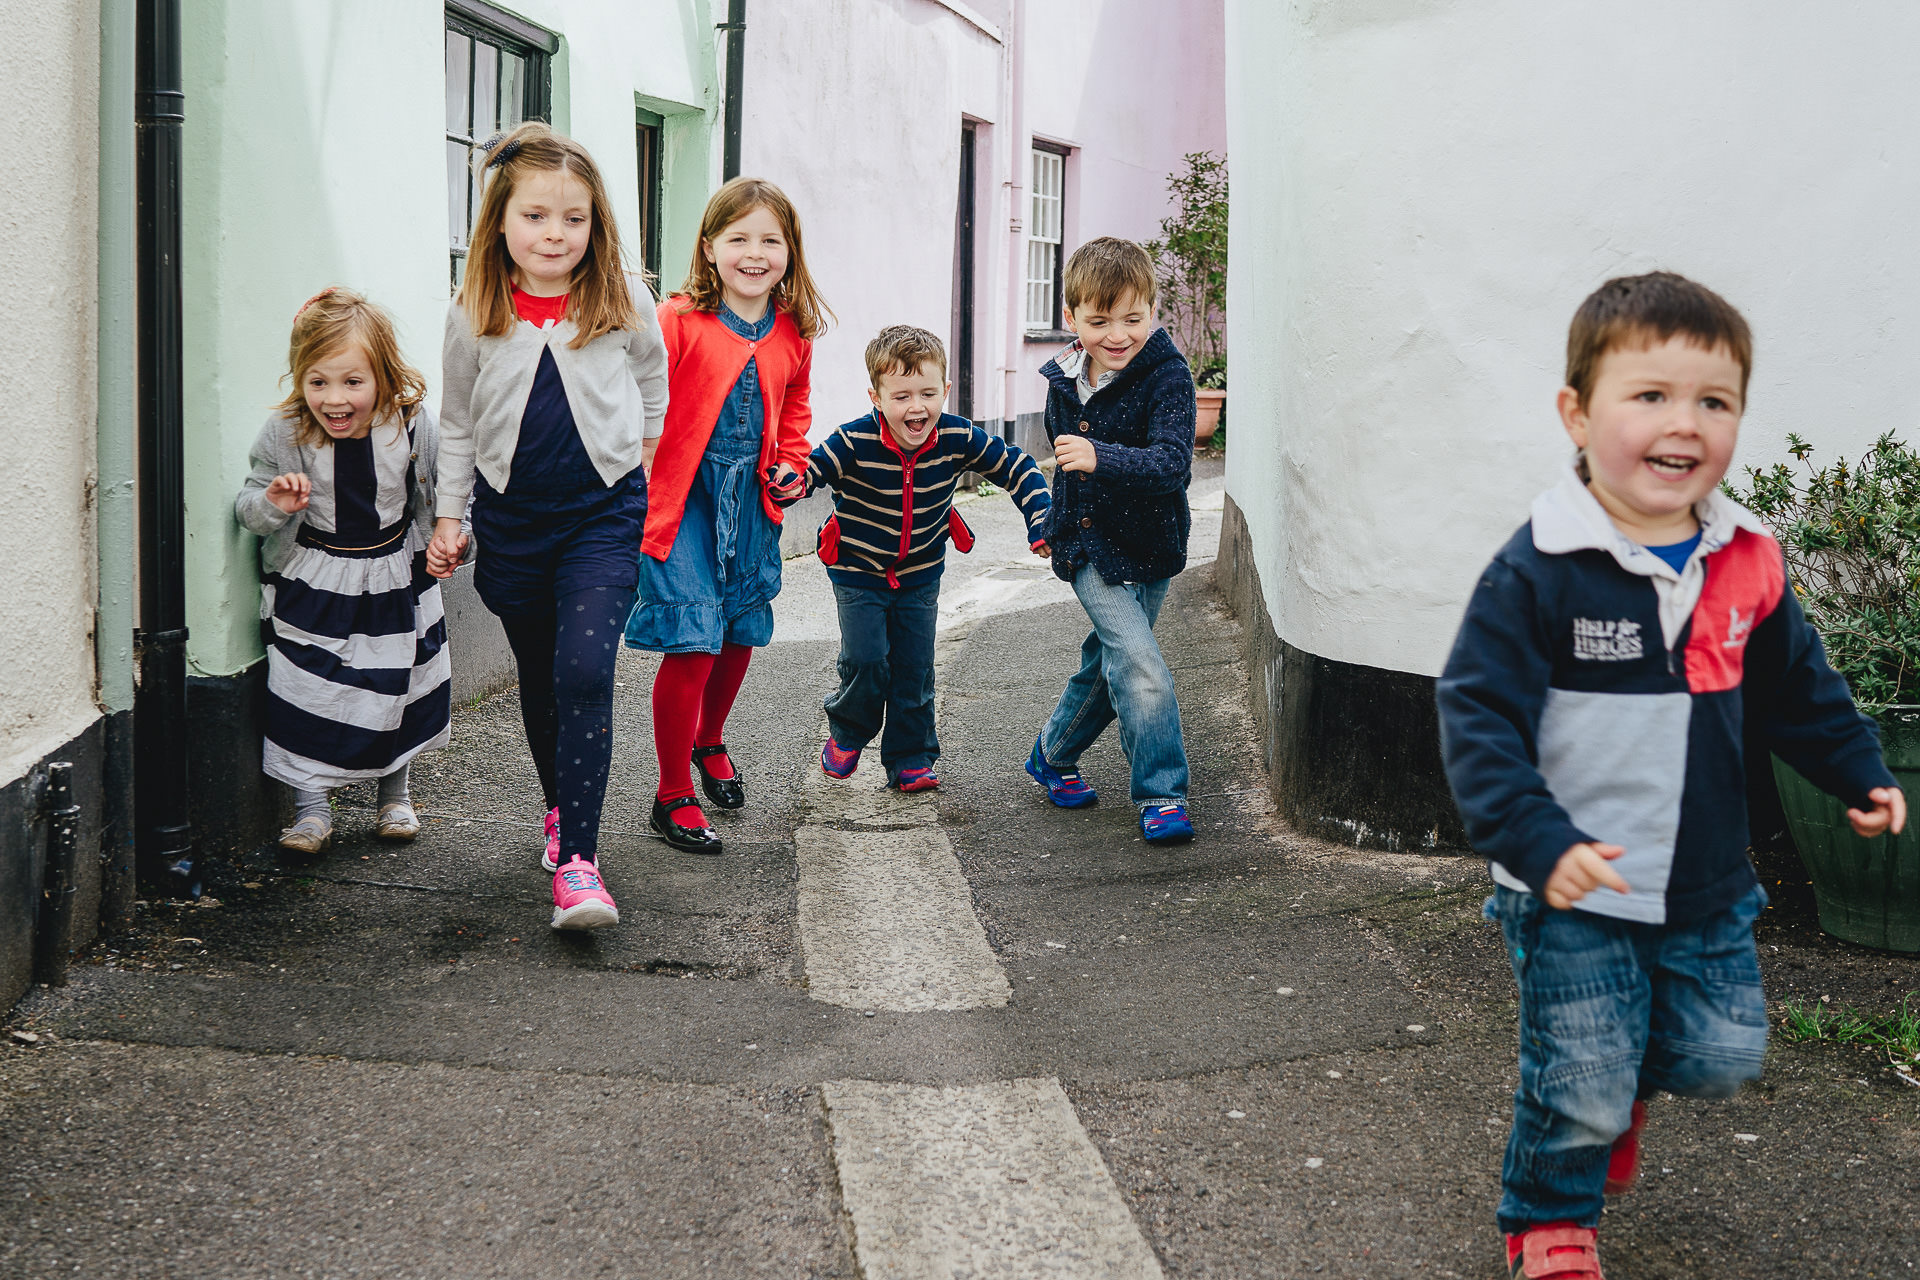 A group of children running through the streets at Appledore